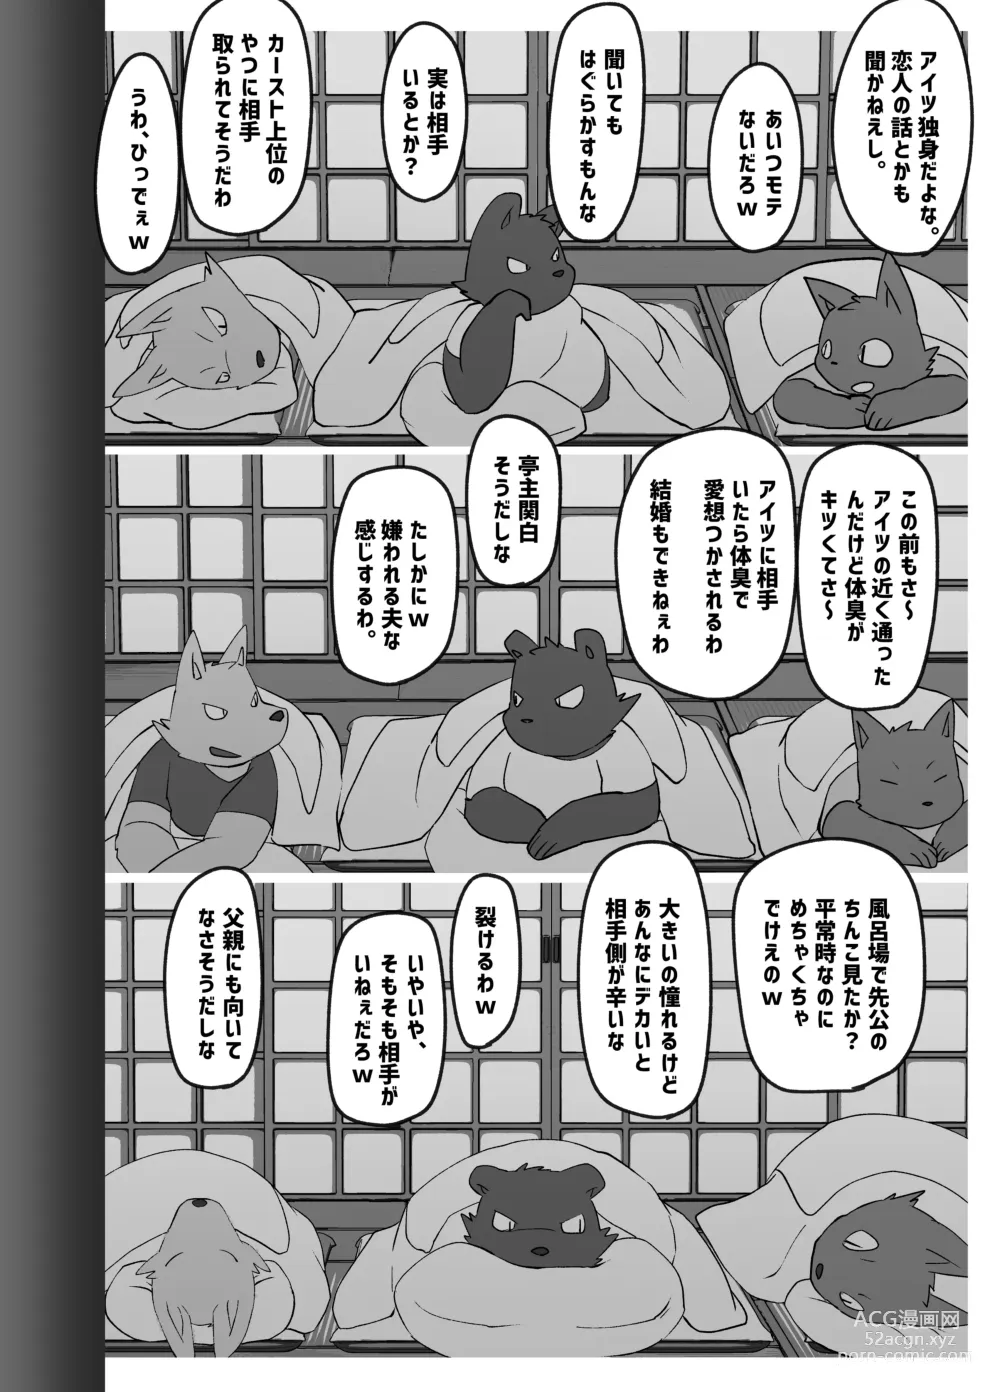 Page 27 of doujinshi Muscular Bull Teacher & Chubby Tiger Student 3